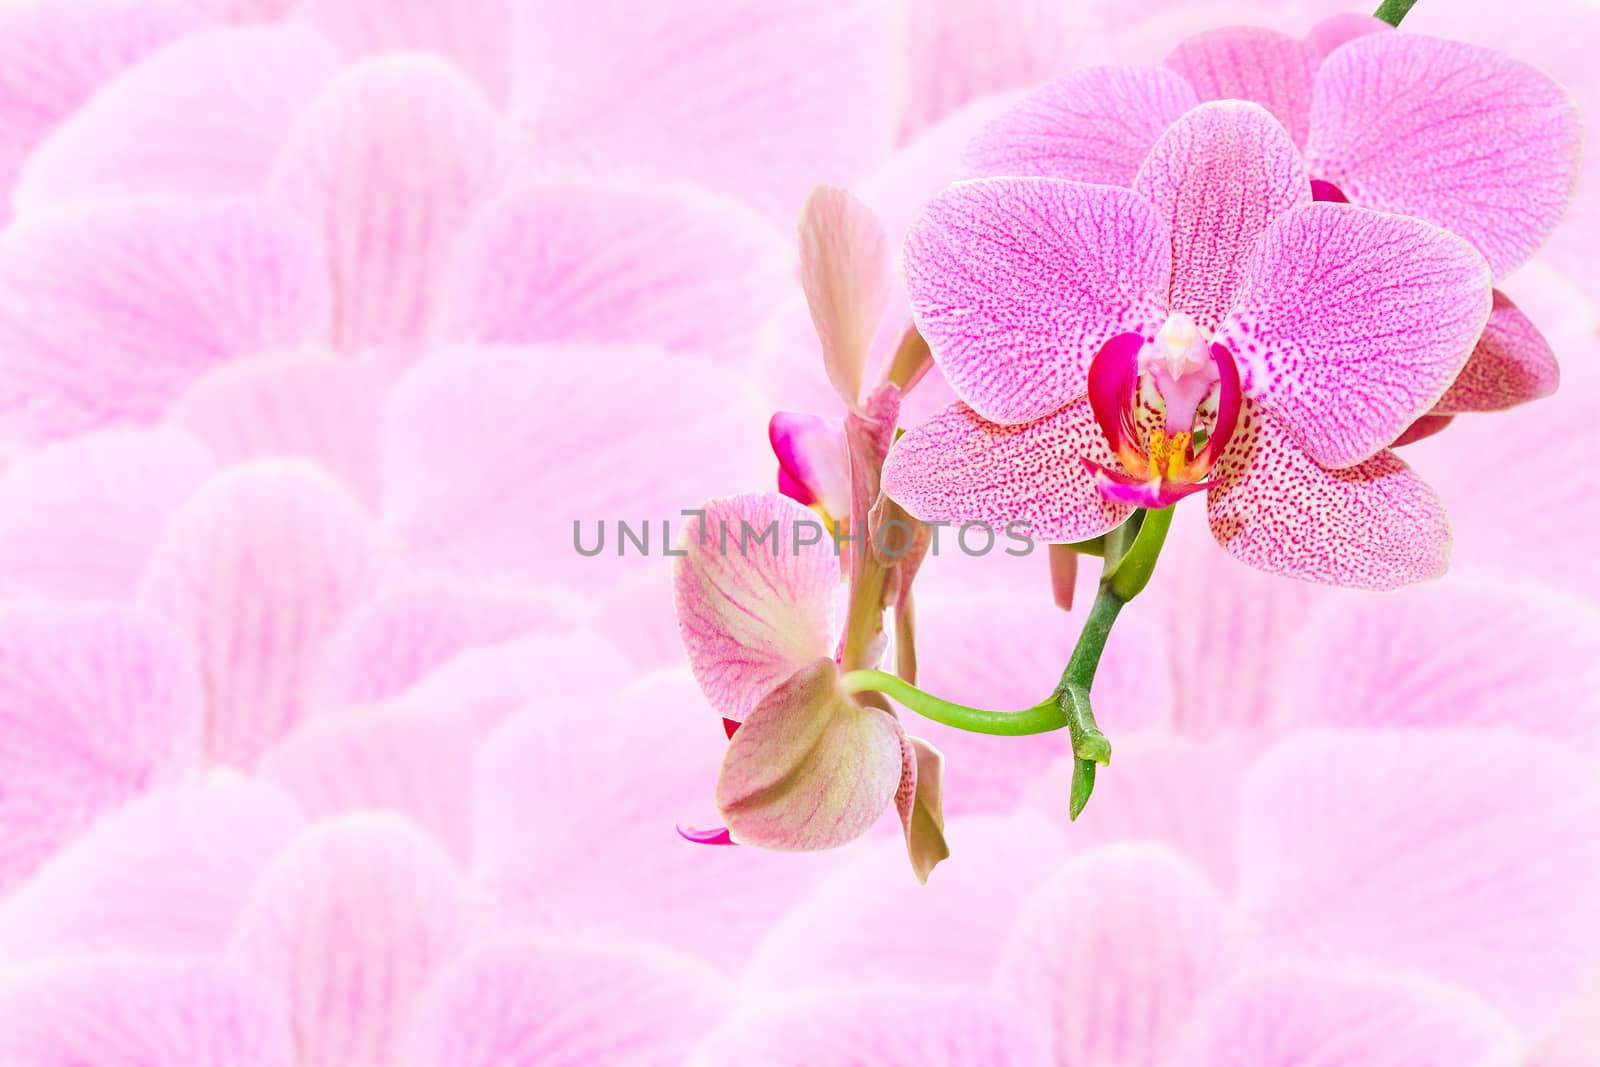 Pink spotted exotic flowers on blurred orchid petals with copyspace for your text